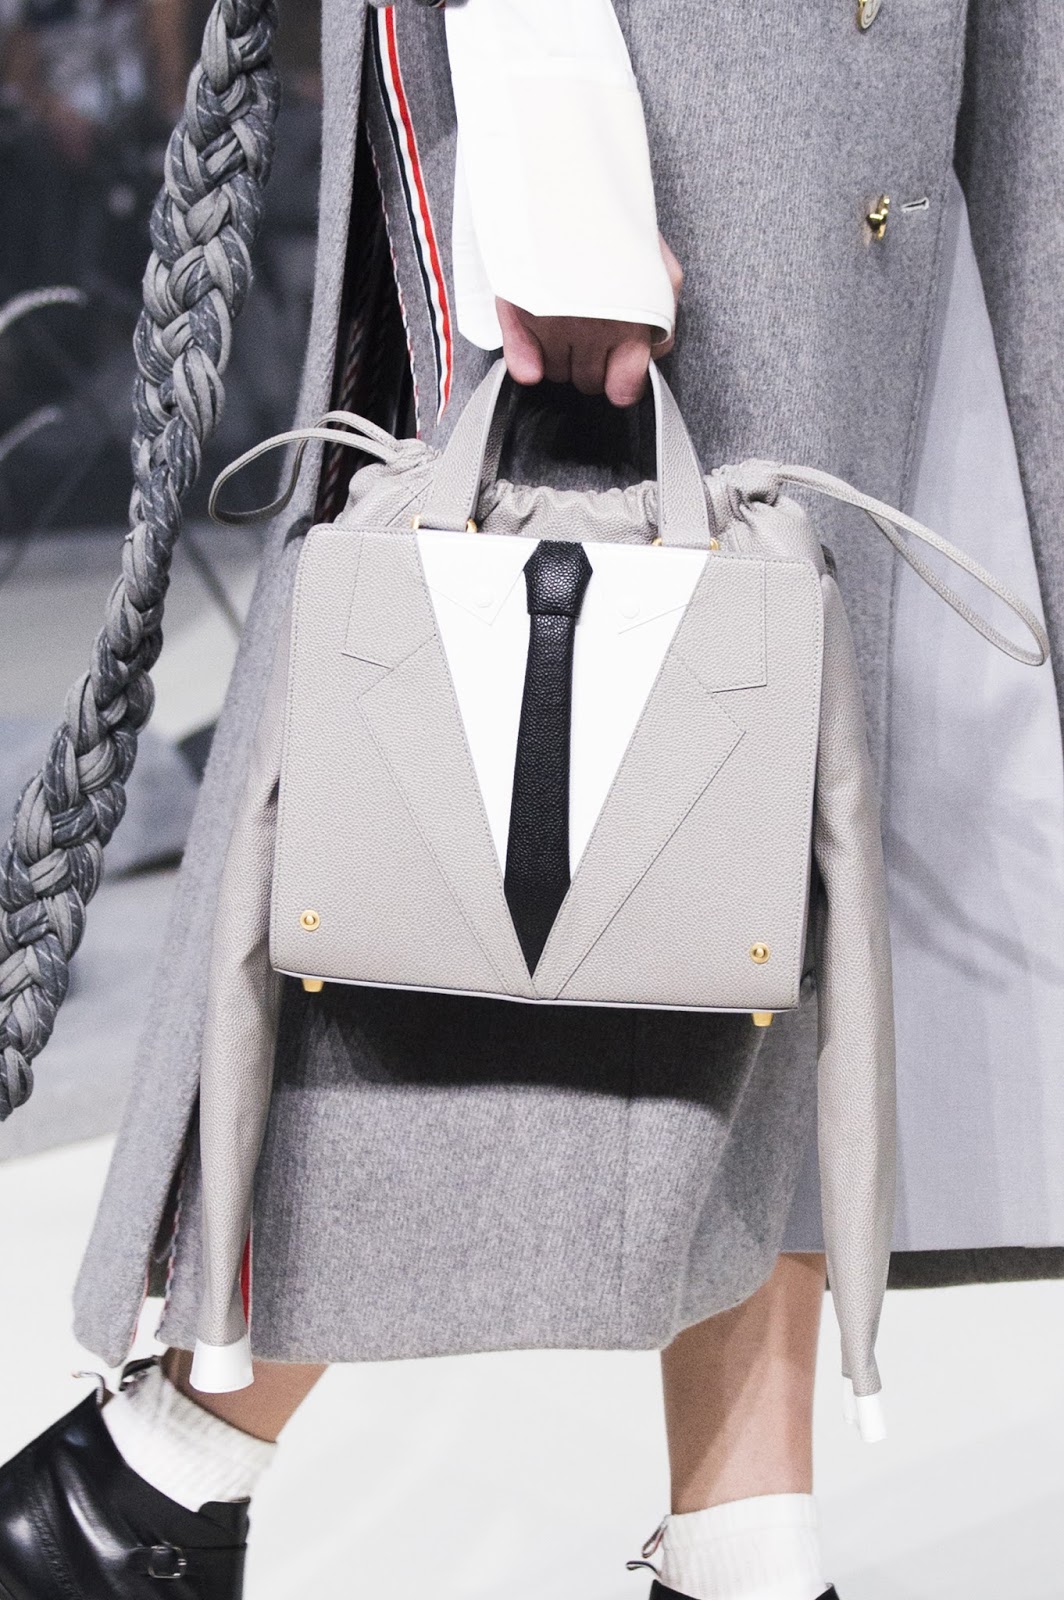 On another level:THOM BROWNE